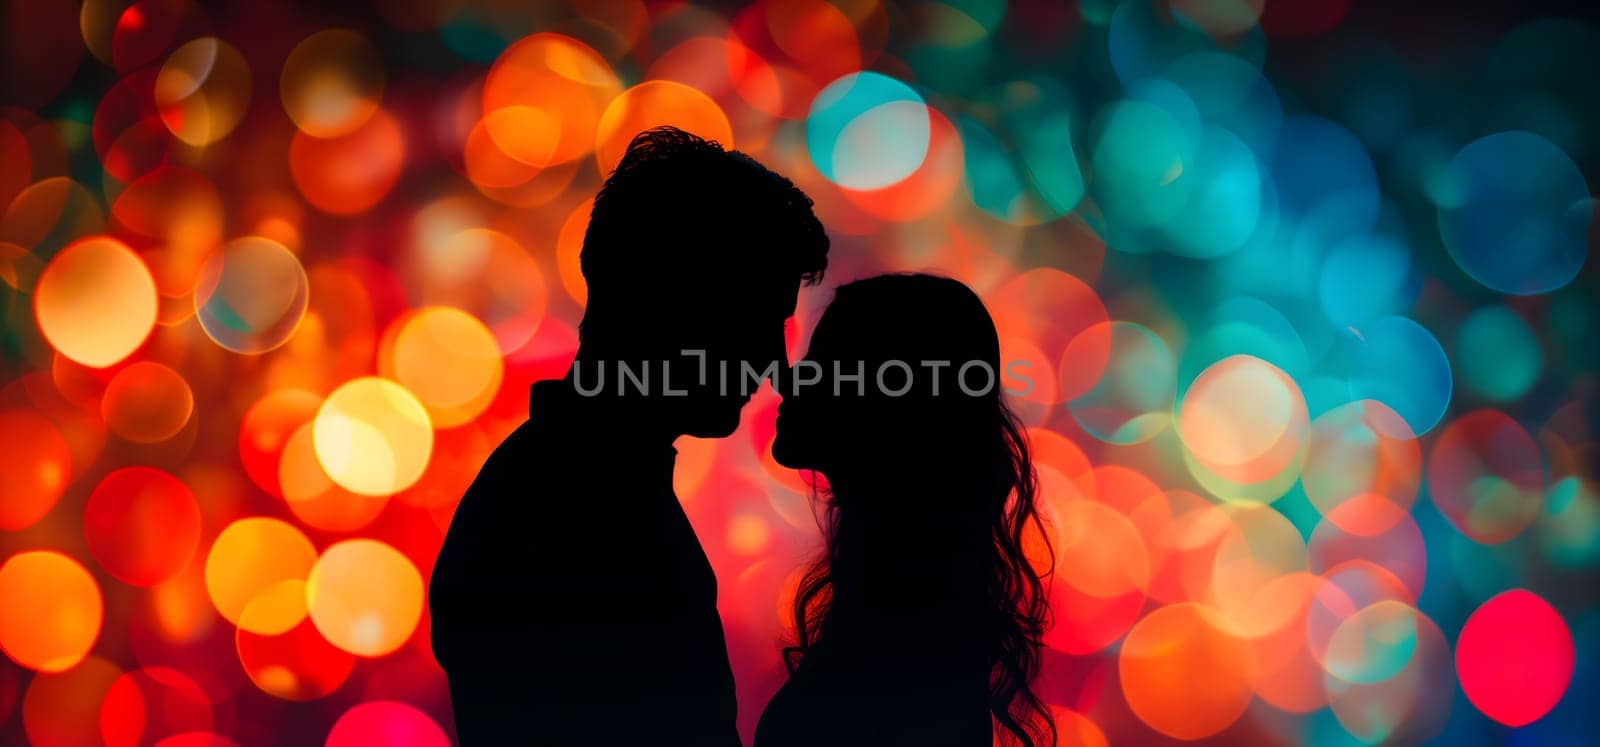 Silhouette of a couple with a colorful bokeh background. Neural network generated image. Not based on any actual person or scene.